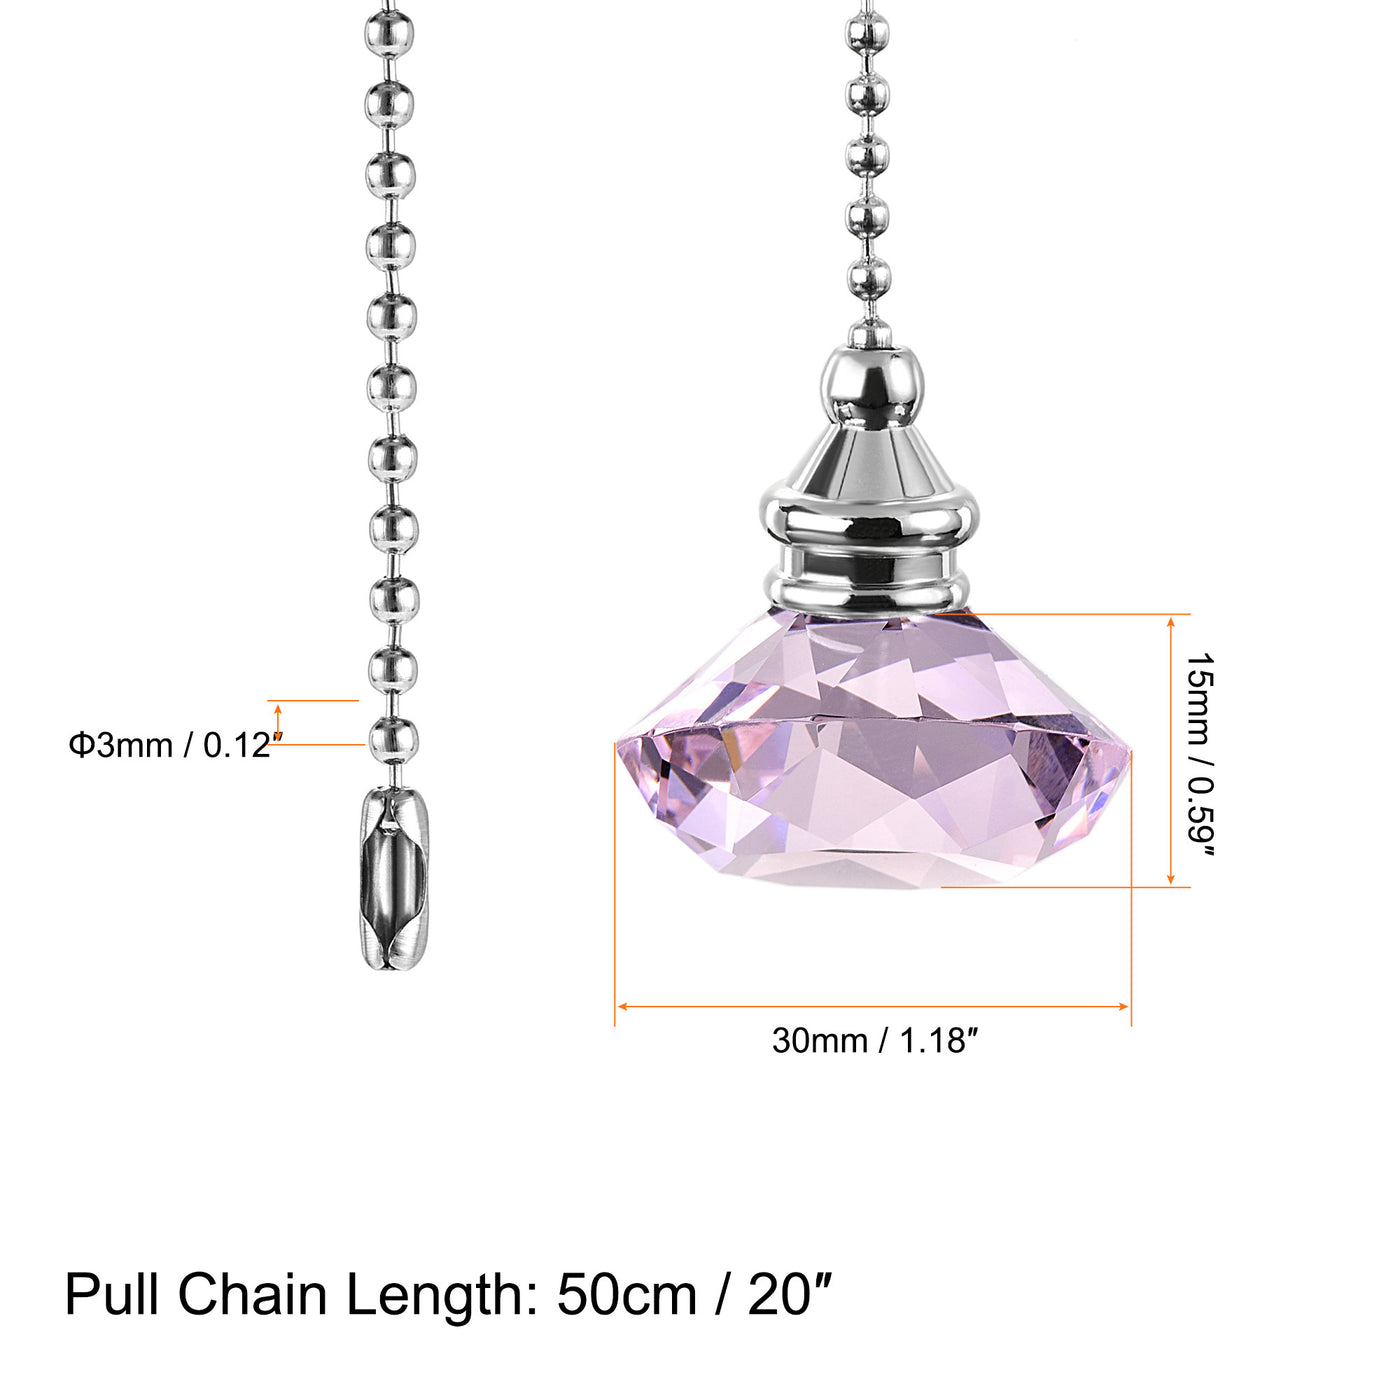 uxcell Uxcell 20 Inch Ceiling Fan Pull Chain, Decorative Crystal Fan Pull Chain Ornament Extension, 3mm Diameter Beaded Diamond Pendant, Pink 2Pcs